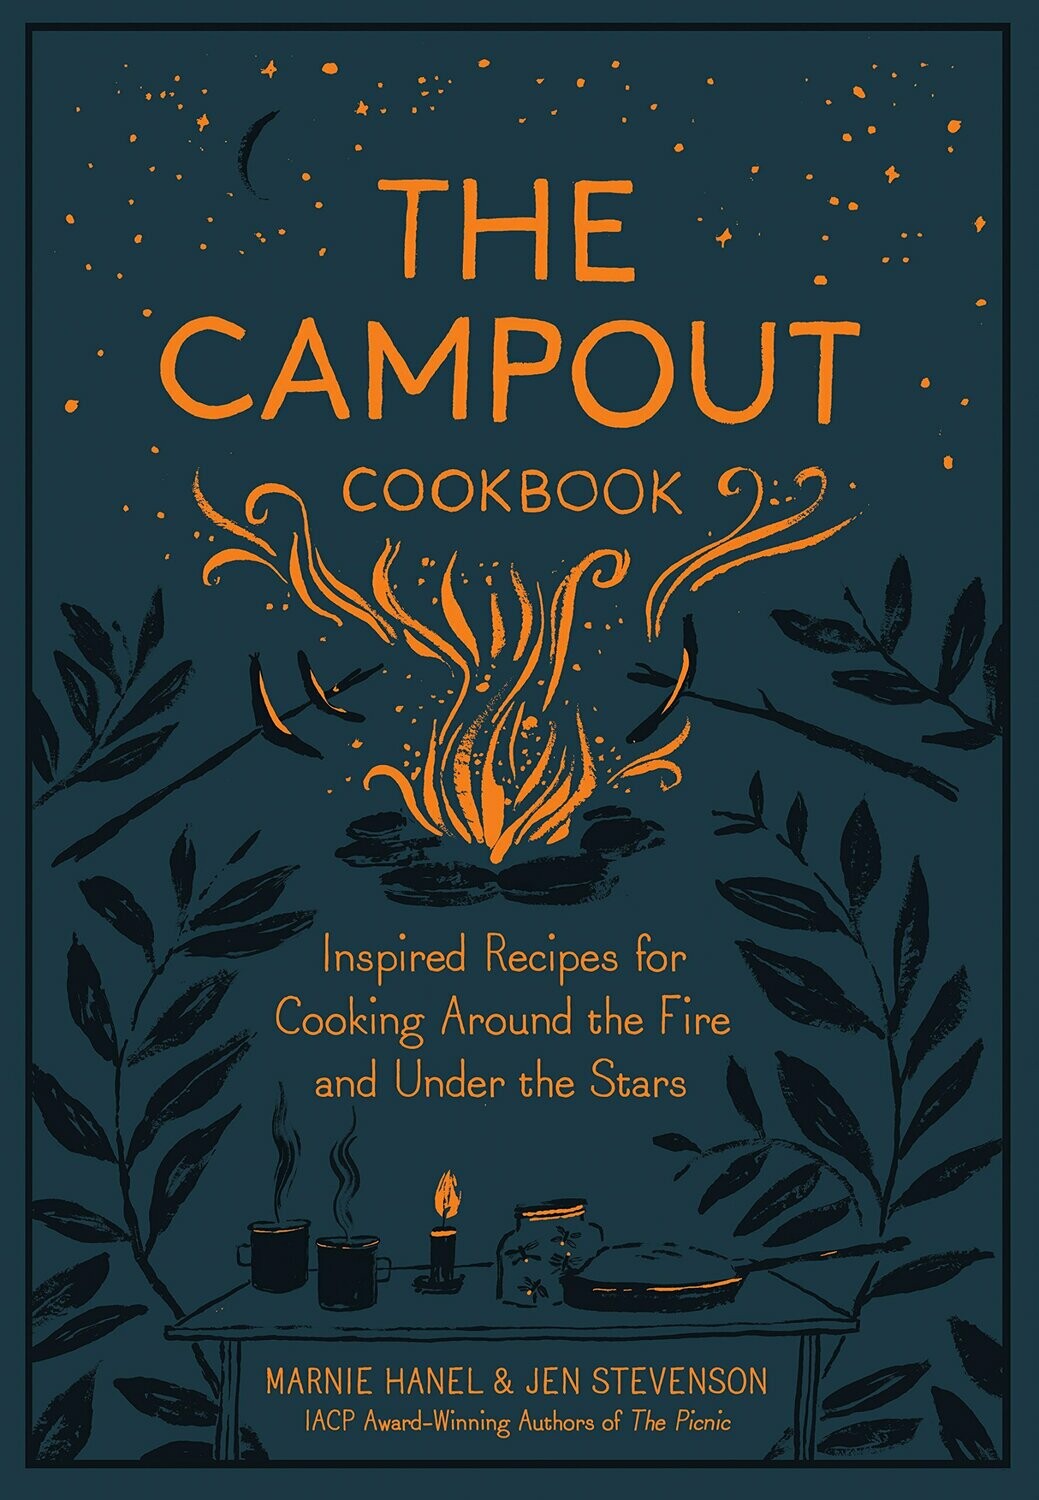 Campout Cookbook: Inspired Recipes for Cooking Around the Fire and Under the Stars